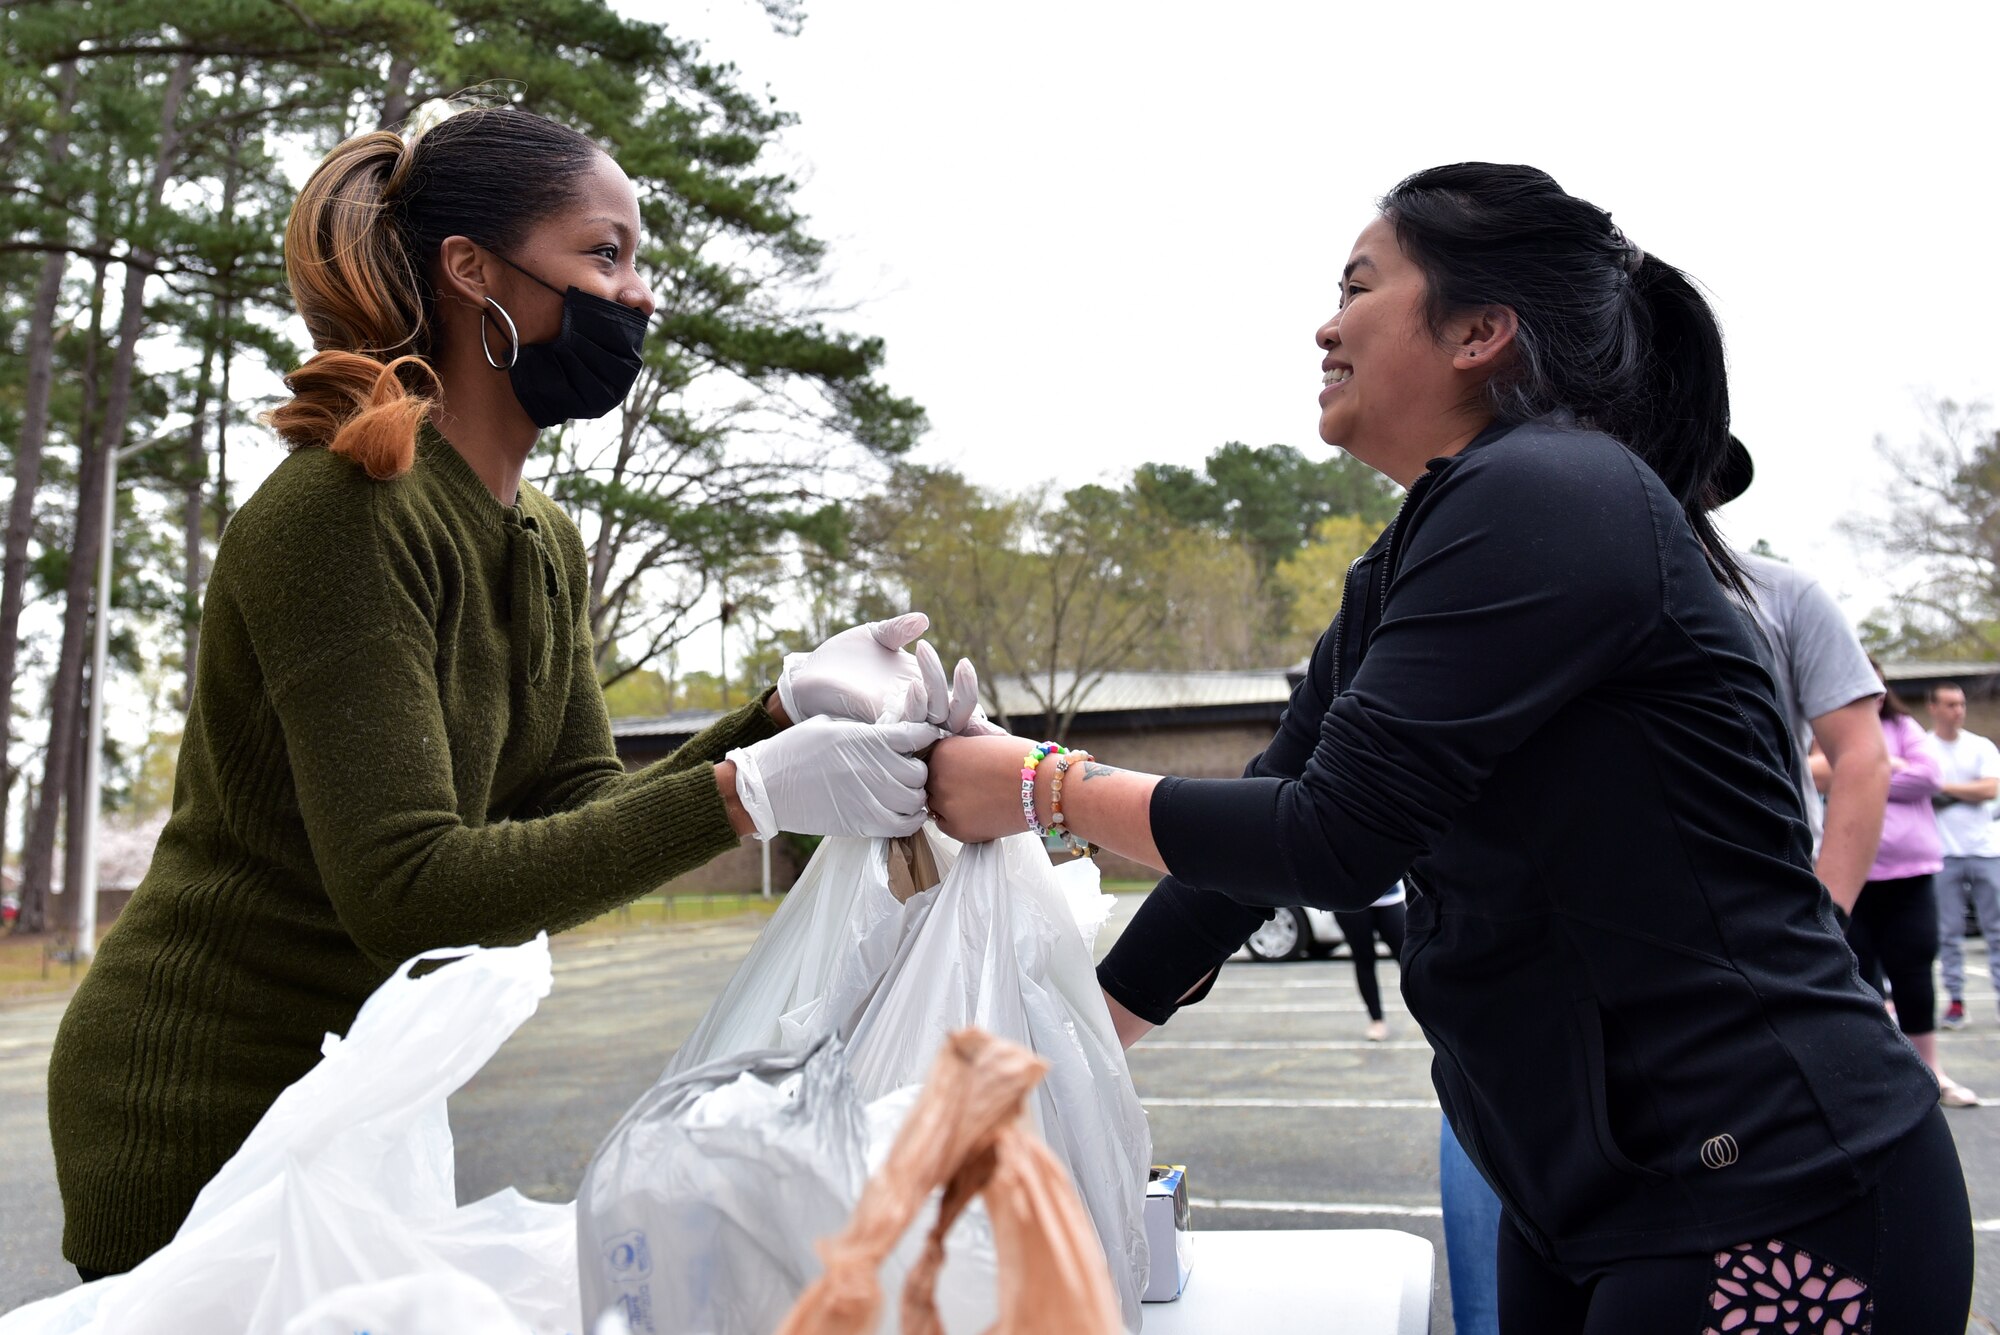 Melanie Simon, left, hands produce to Tina Anderson, during a bi-monthly produce run at Seymour Johnson Air Force Base, N.C. on March 22, 2020.